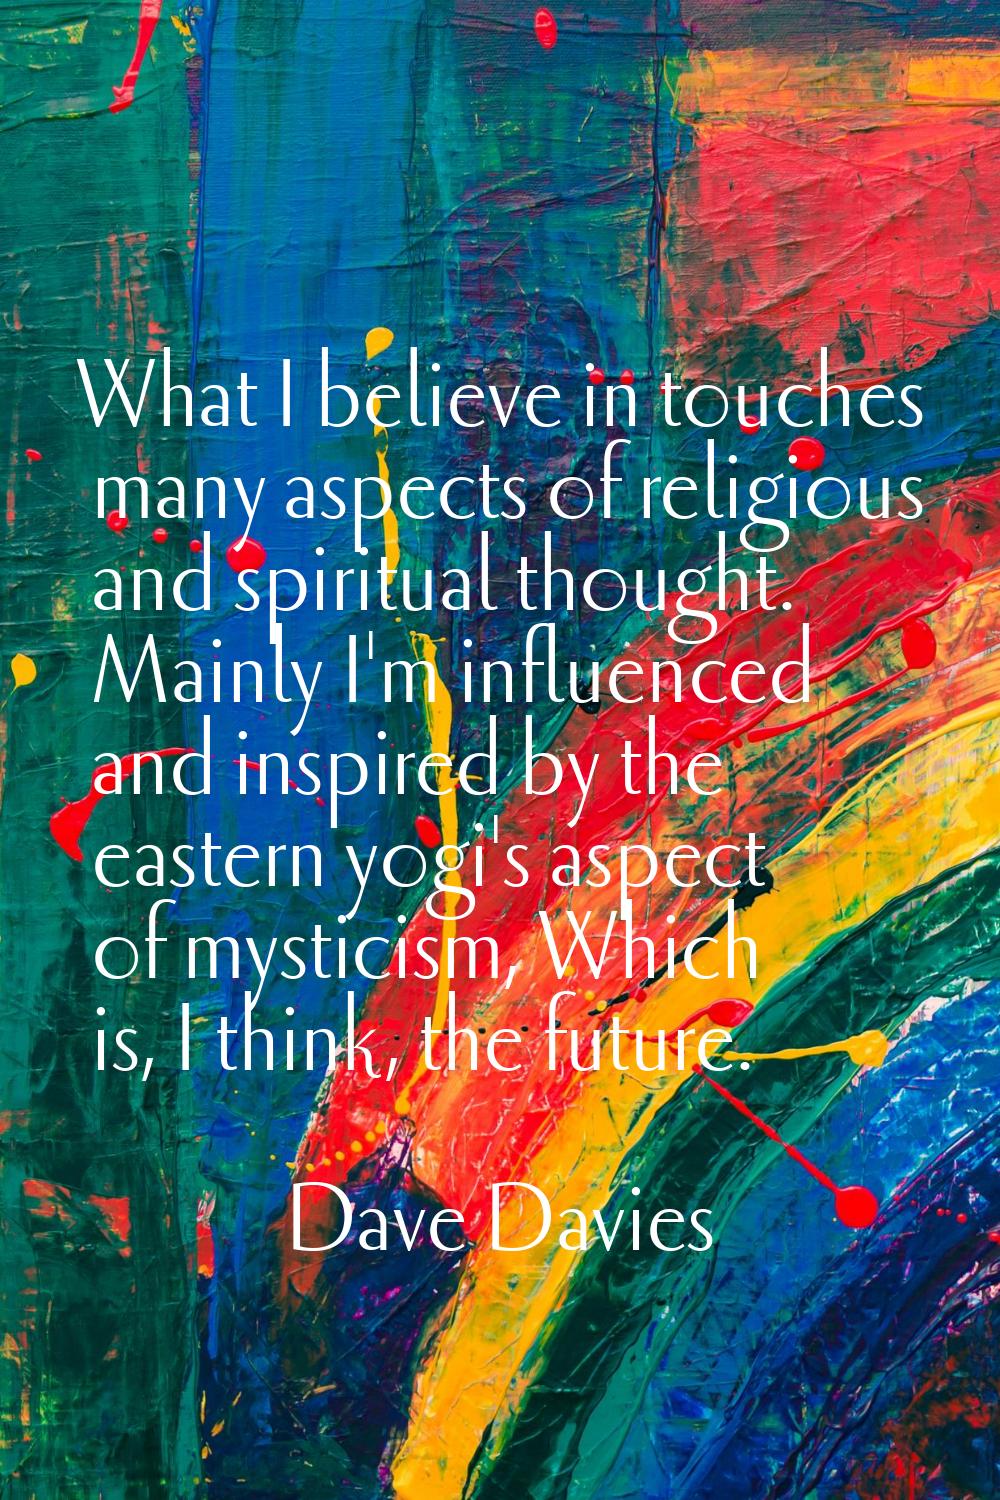 What I believe in touches many aspects of religious and spiritual thought. Mainly I'm influenced an